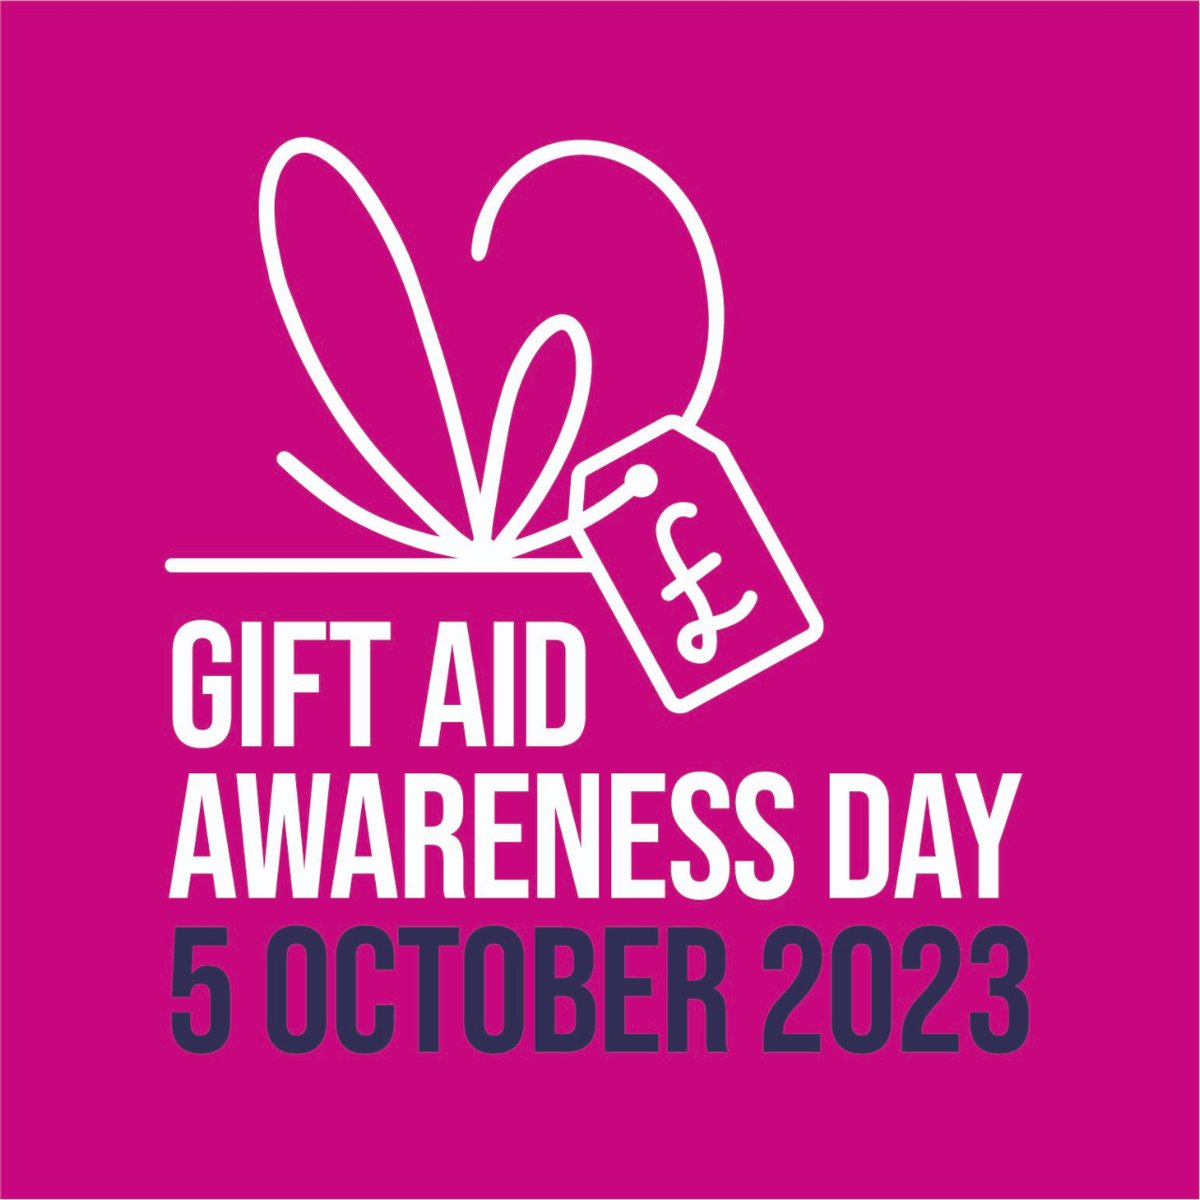 When you #TickTheBox confirming a Charity can claim Gift Aid on your donation it means they can claim an extra 25p for every £1 you donate. 

So if you're donating today - #TickTheBix and give an extra 25% without having to spend any extra.

#TickTheBox #GiftAidAwarenessDay